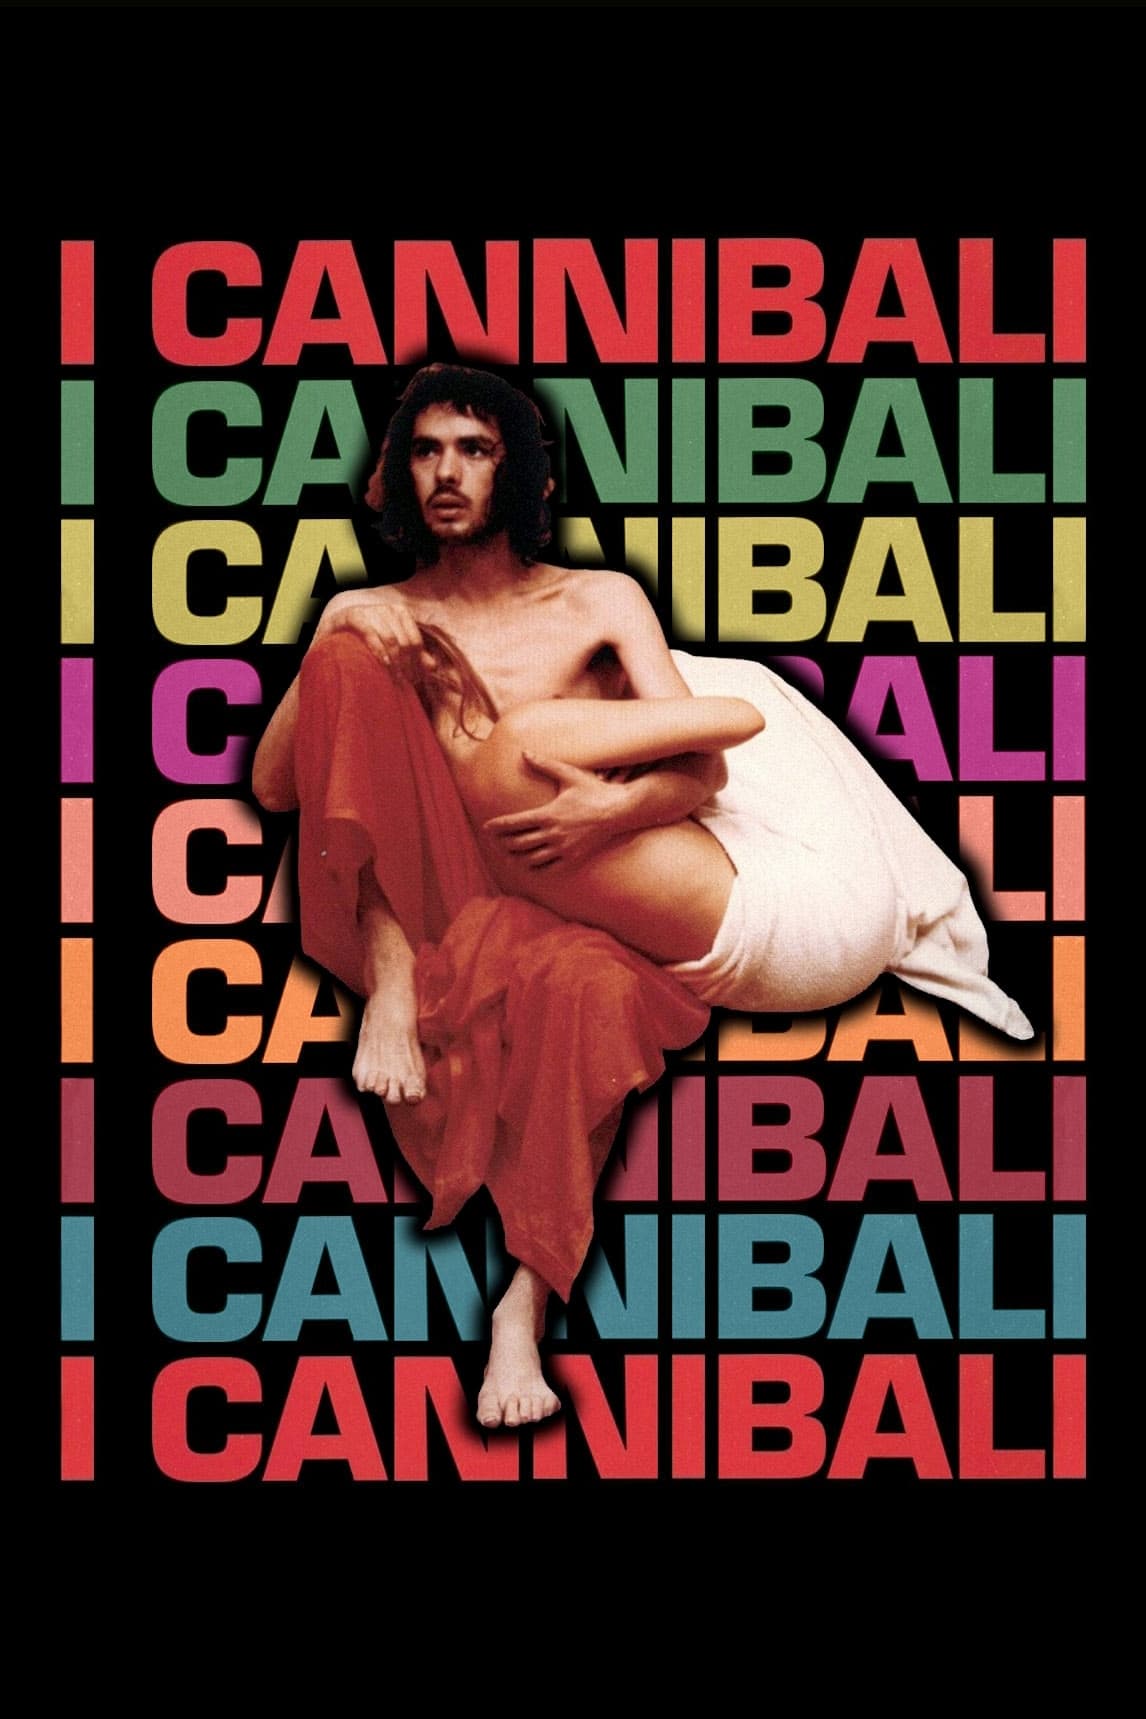 Poster for the movie "I cannibali"